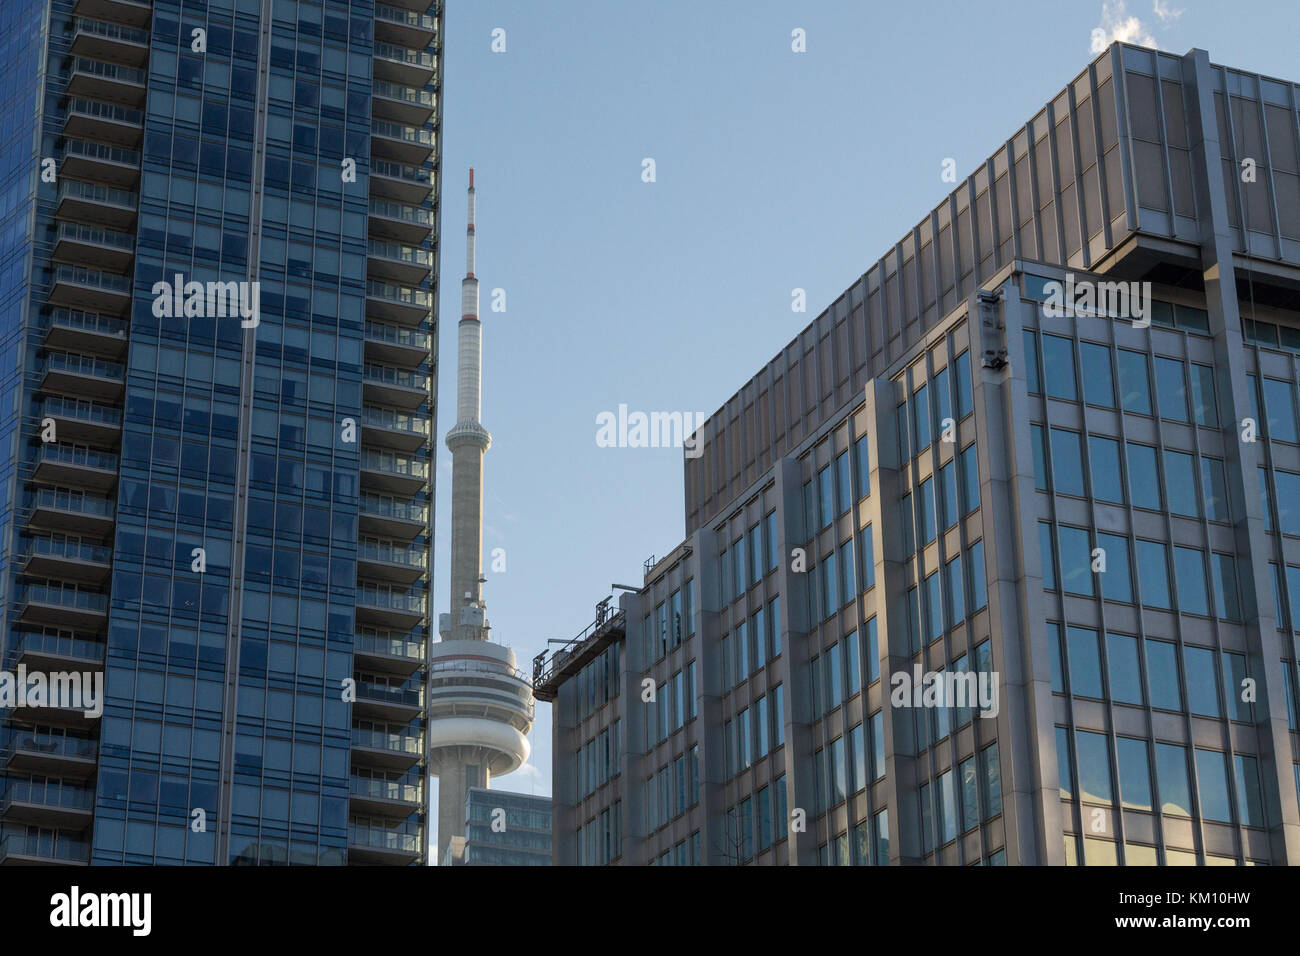 TORONTO, CANADA - DECEMBER 20, 2016: Canadian National Tower (CN Tower) surrounded by more modern buildings in downtown Toronto. CN Tower is the talle Stock Photo